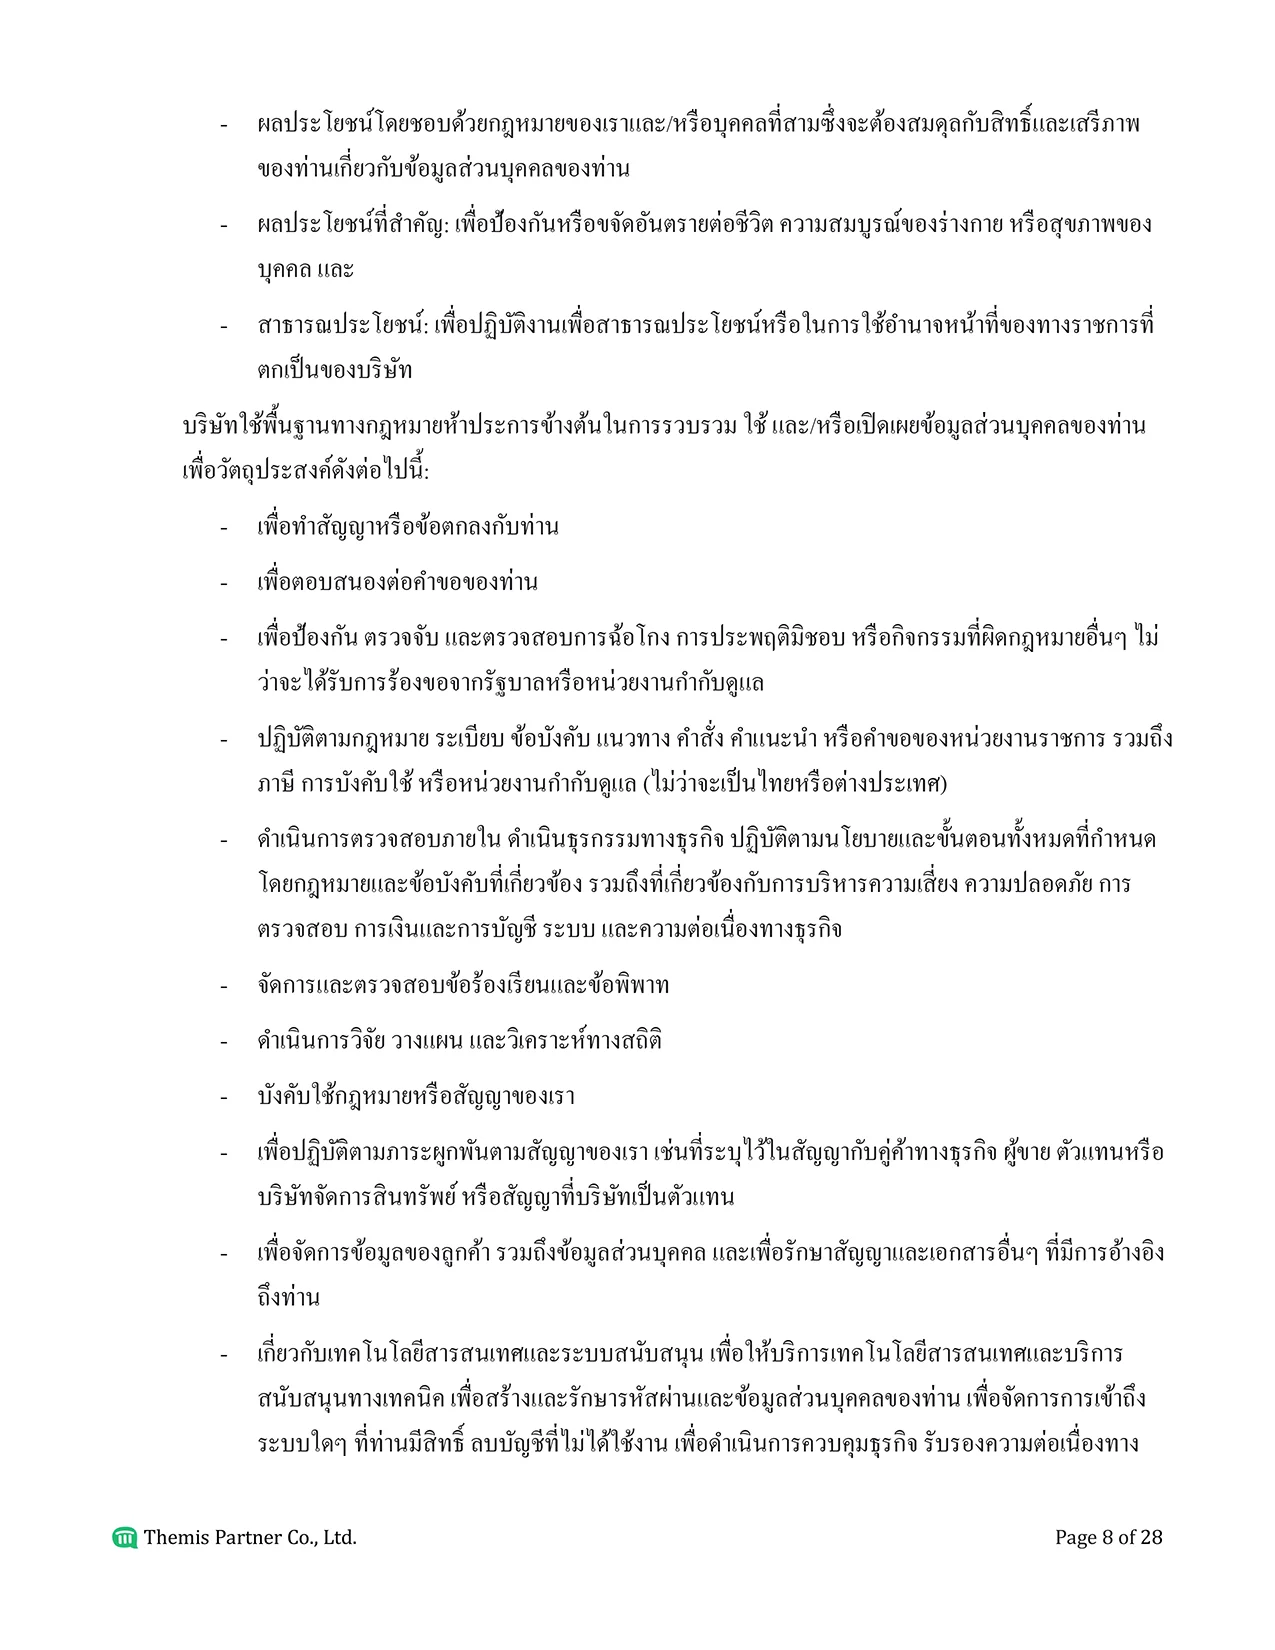 PDPA consent form and company policy Thailand 8